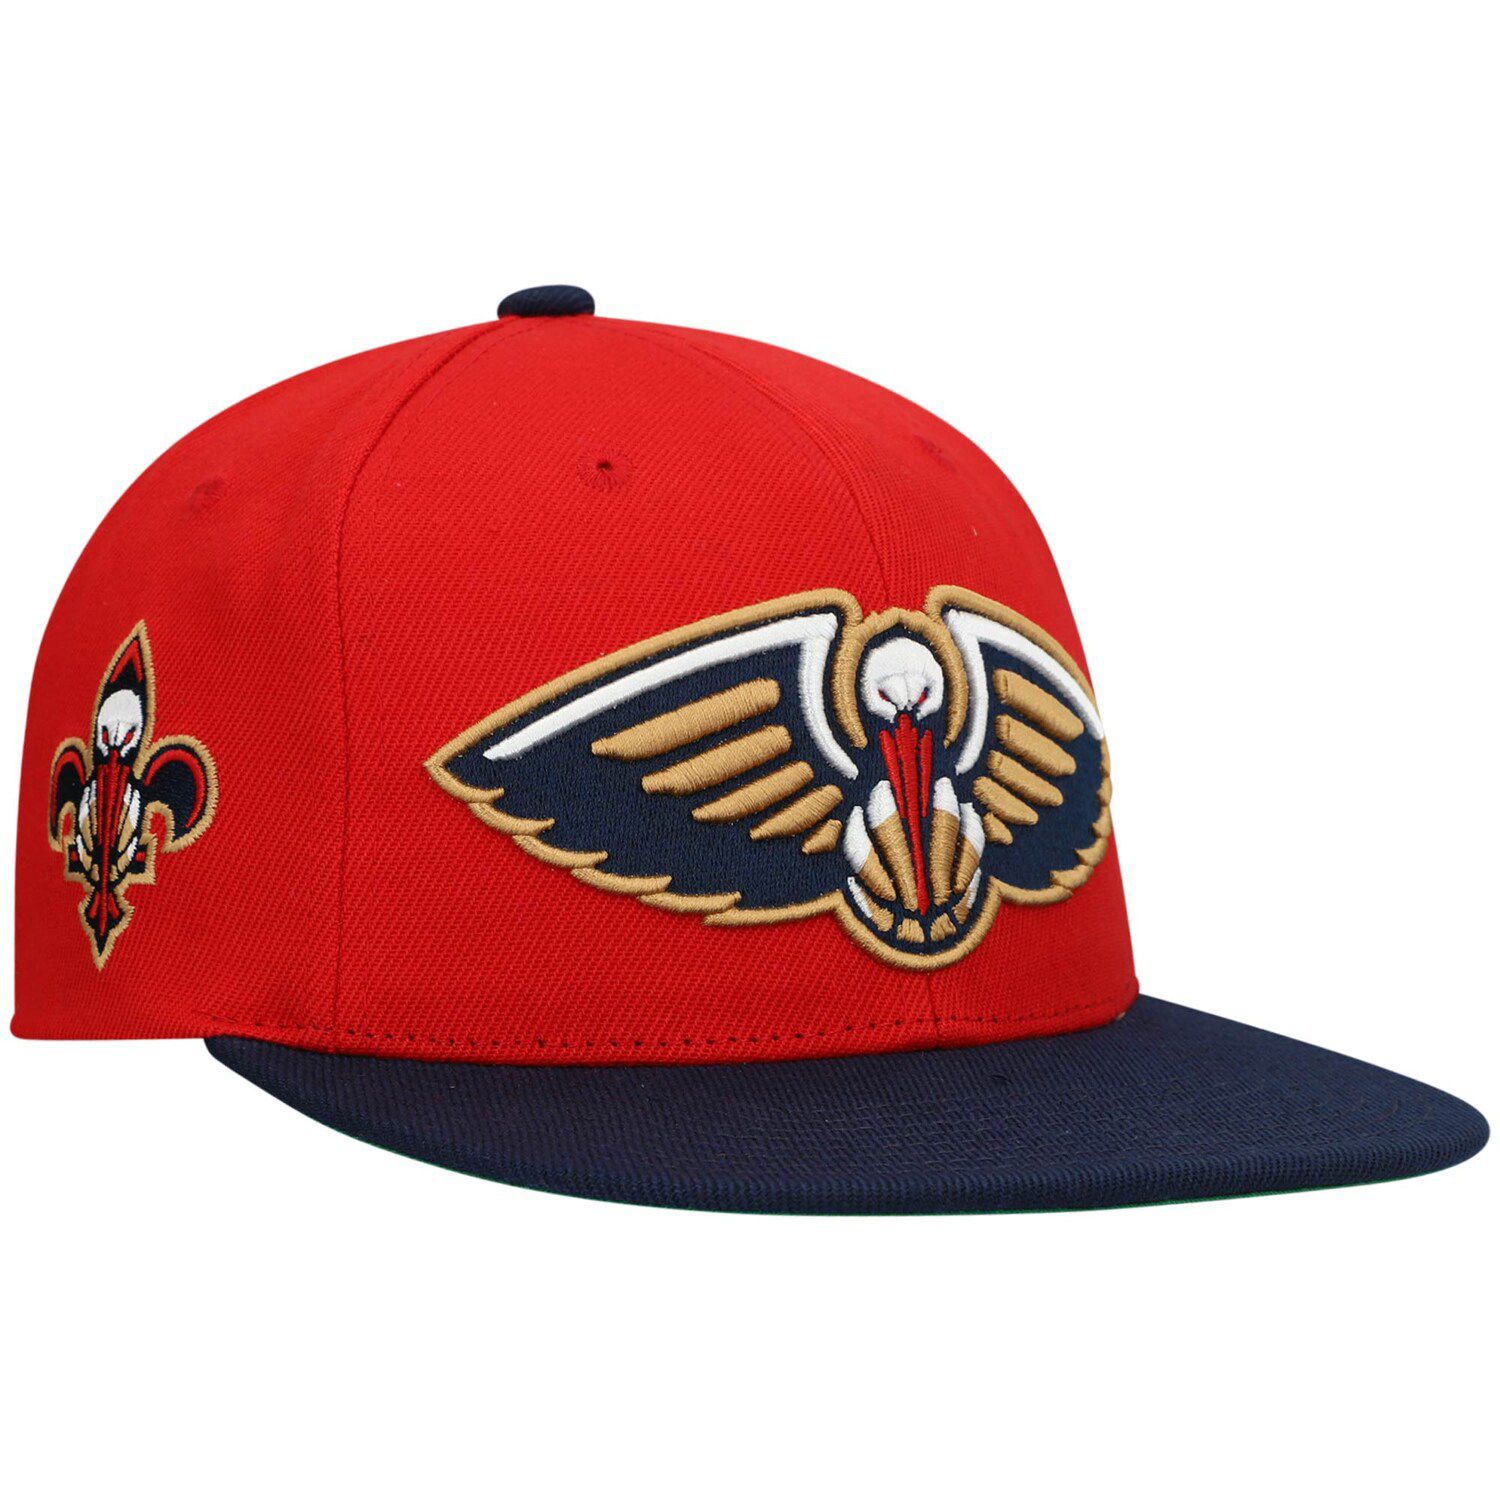 Image for Unbranded Men's Mitchell & Ness Red/Navy New Orleans Pelicans XL Wordmark Snapback Hat at Kohl's.